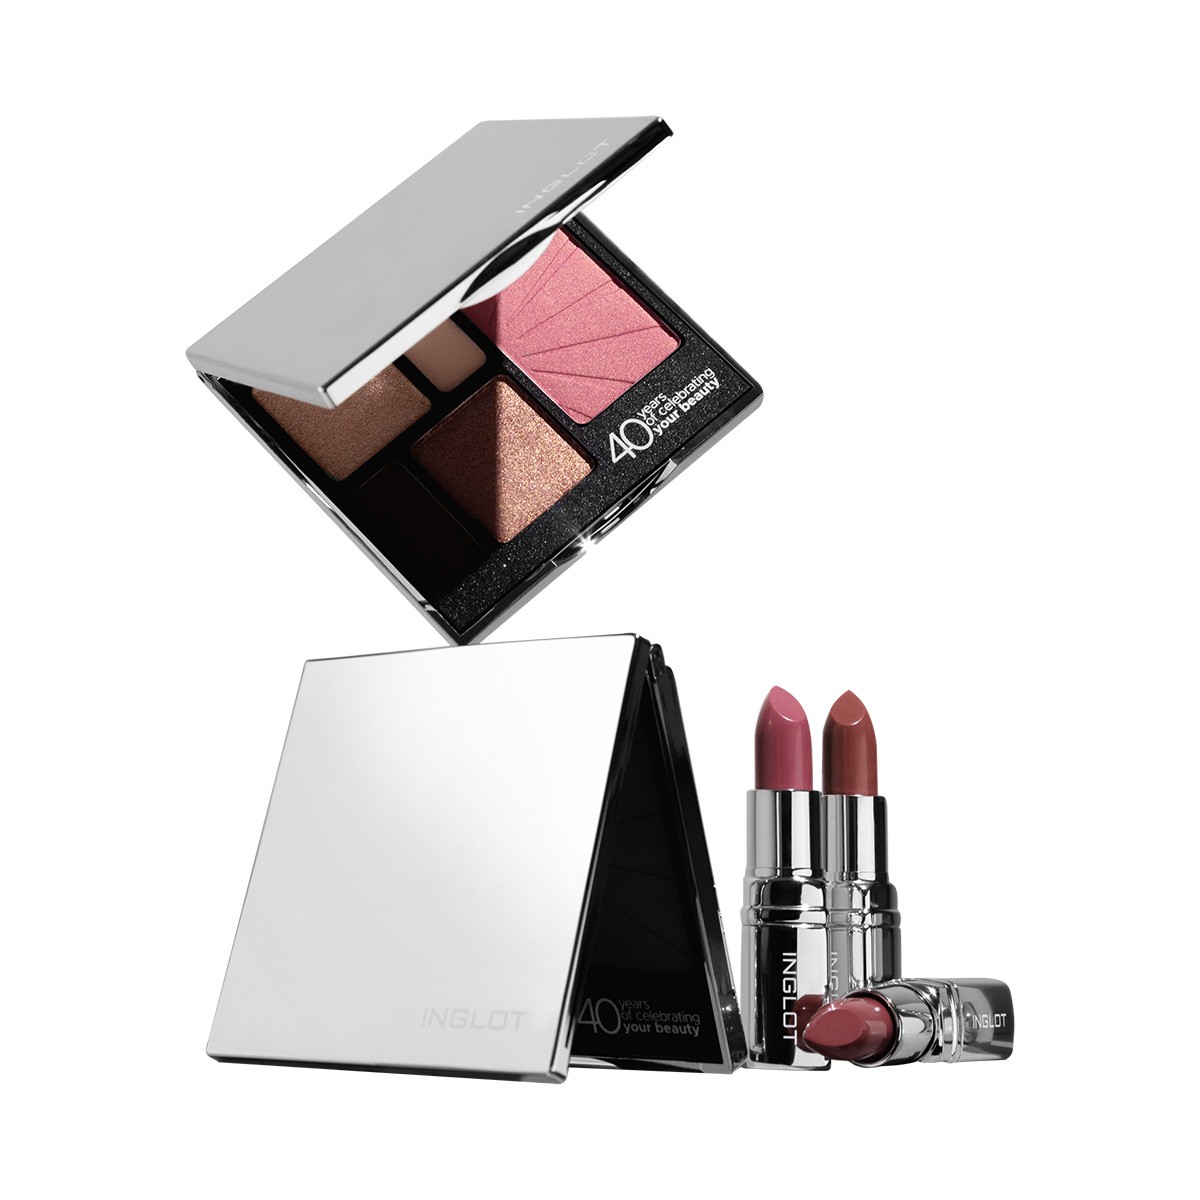 INGLOT’S LIMITED COLLECTION CELEBRATING 40 YEARS IN THE BEAUTY INDUSTRY